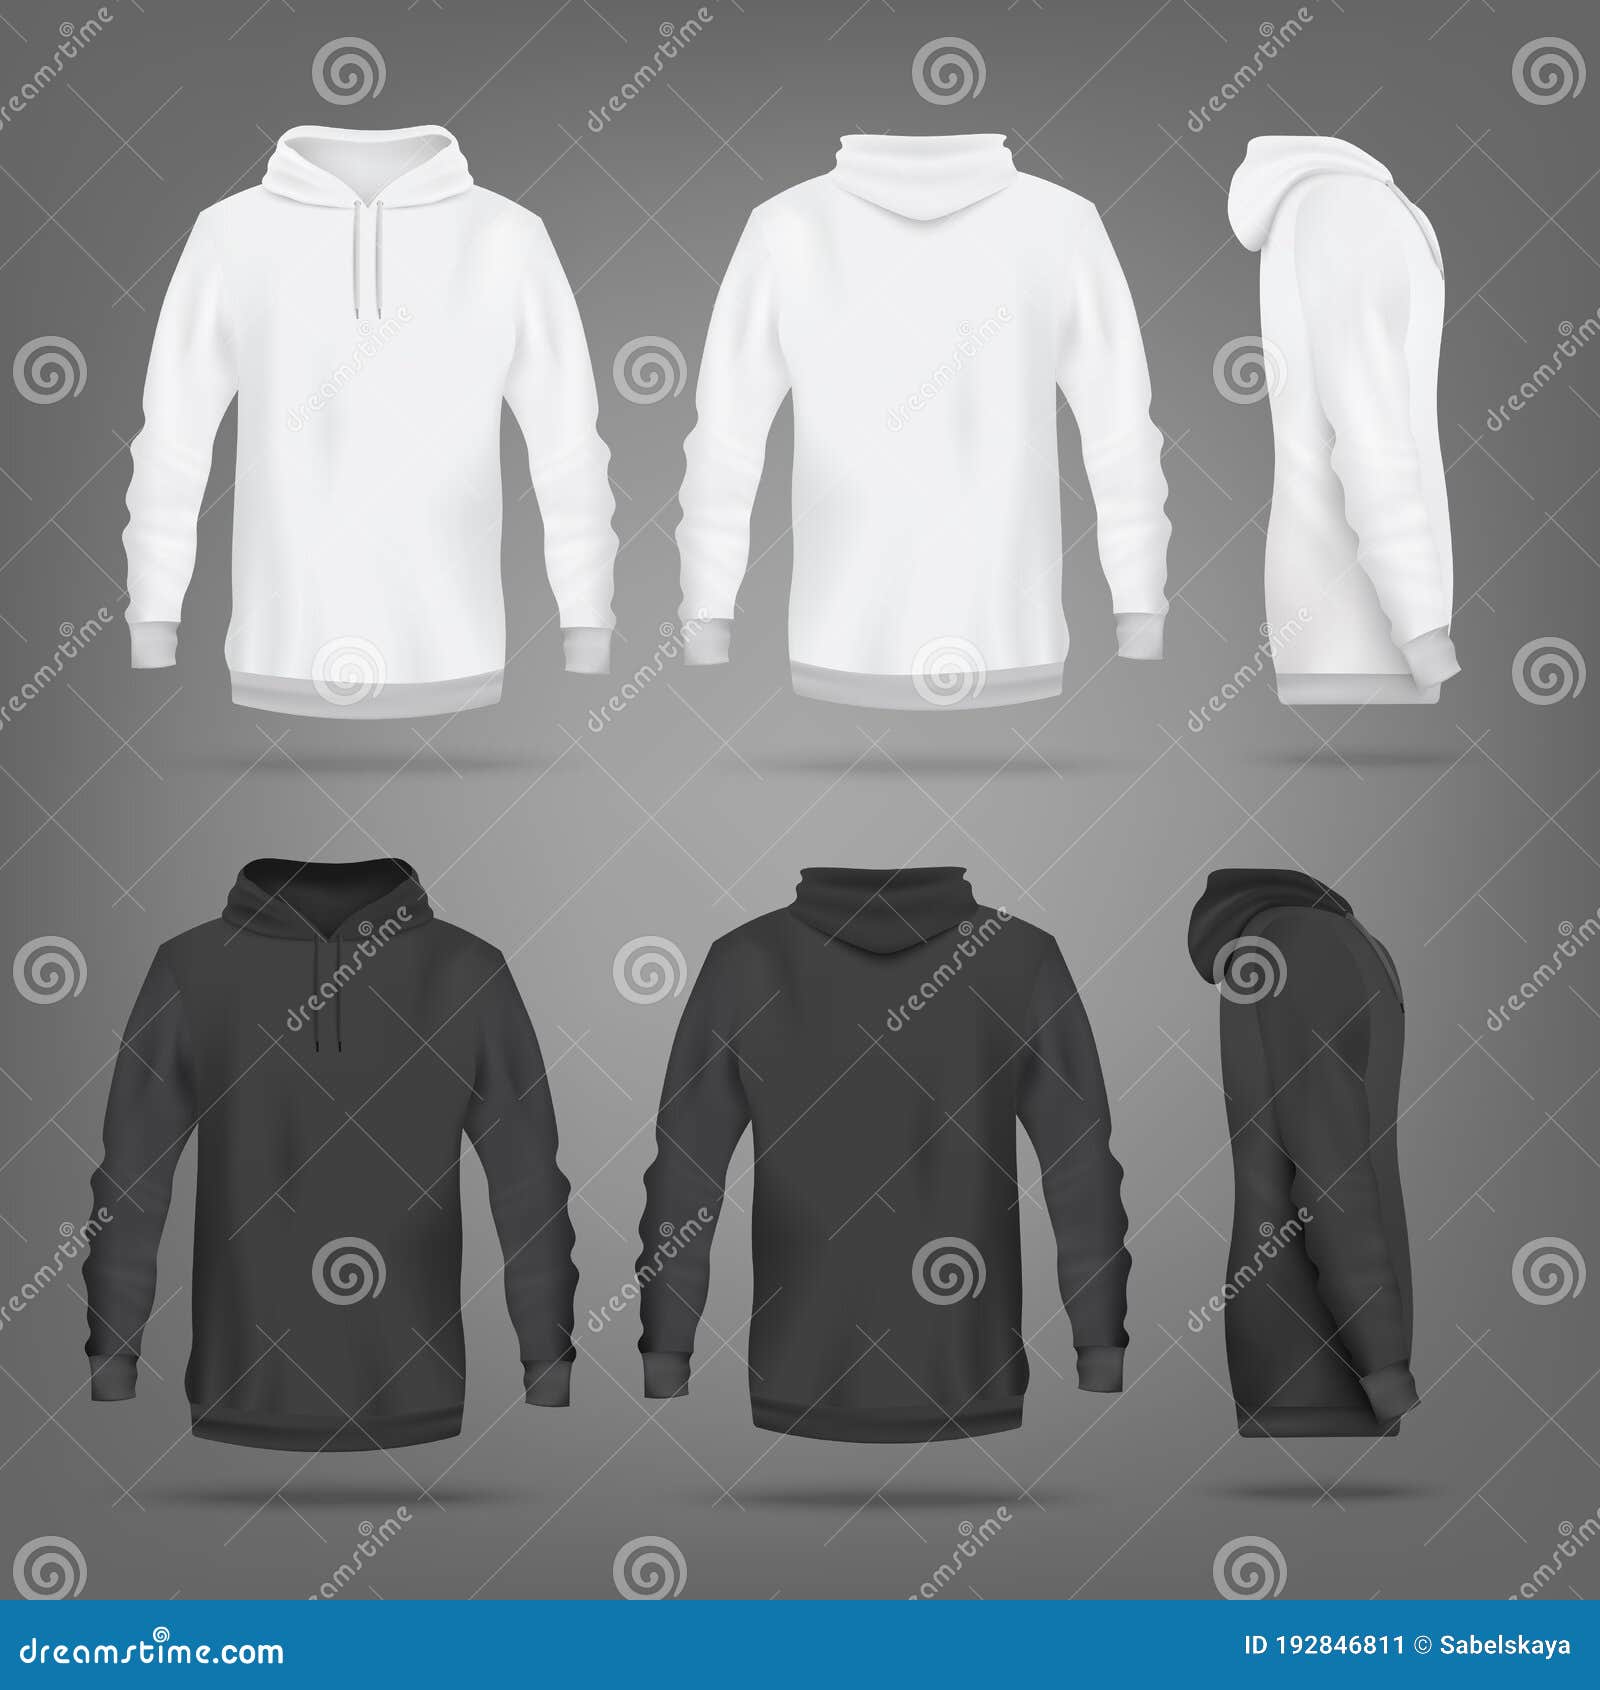 Download Black And White Hoodie Mockup Set - Isolated Sport Apparel ...